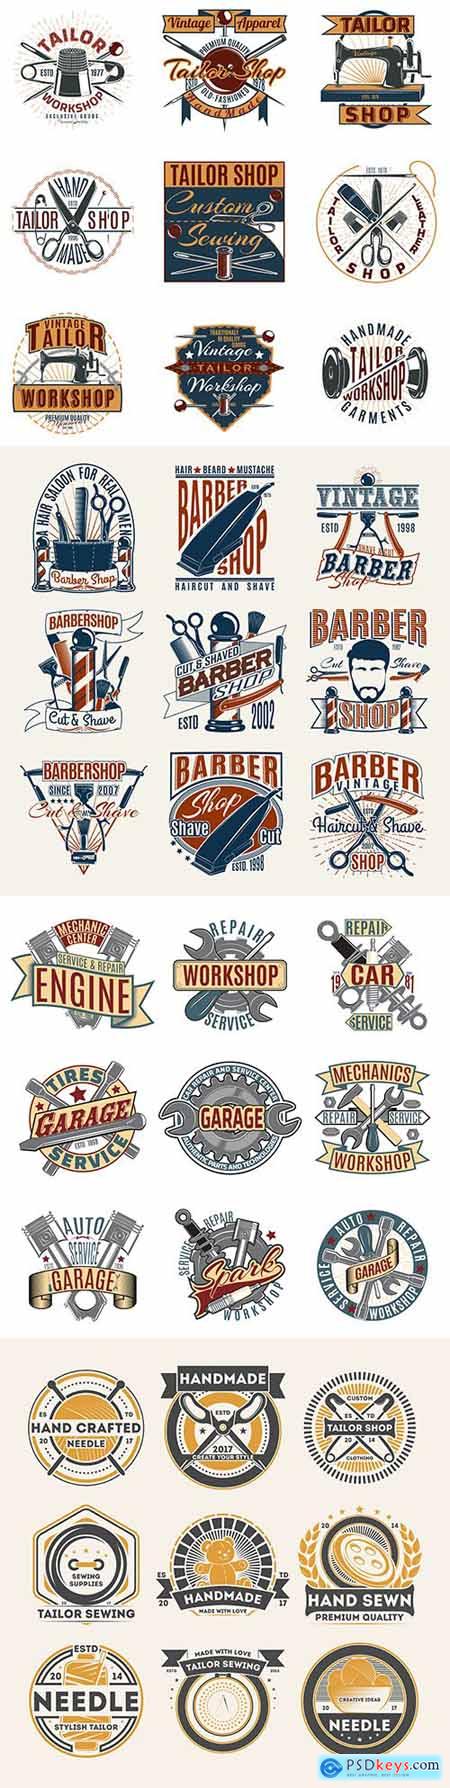 Vintage antique emblems and logos with text design